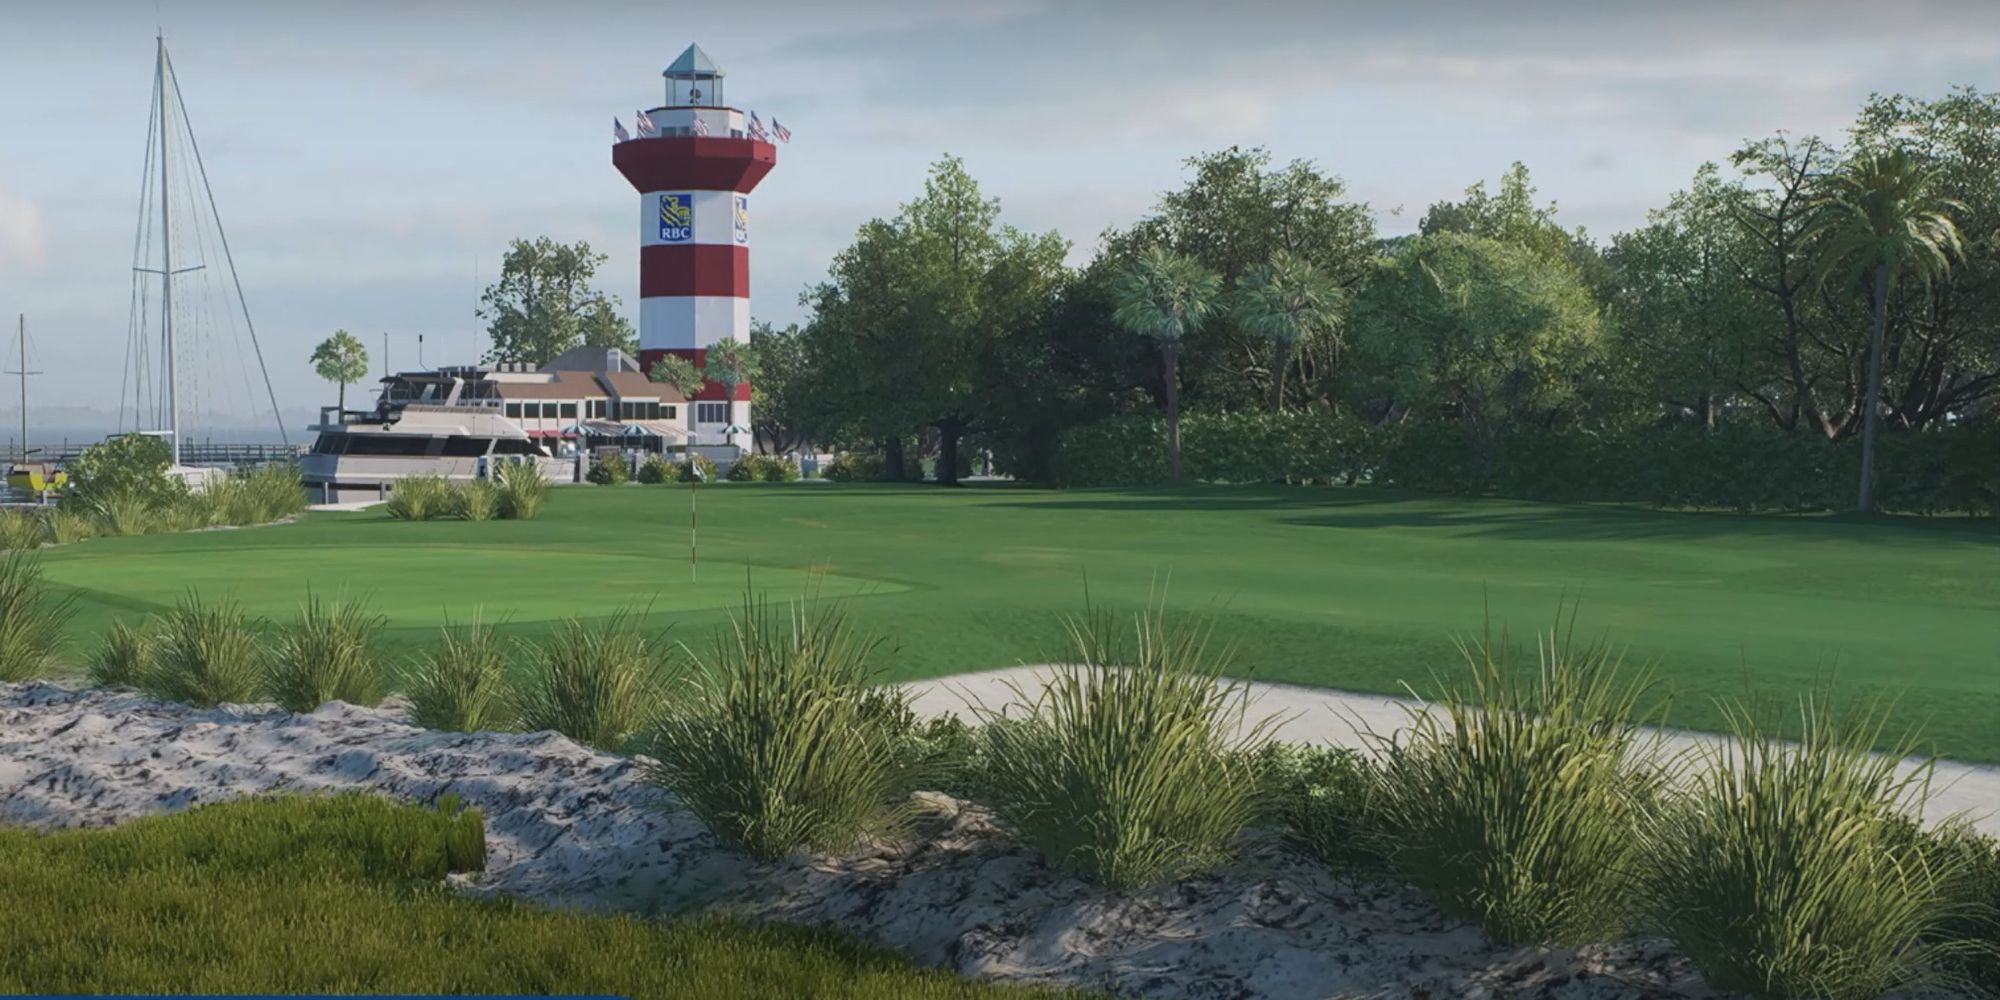 The famous lighthouse at hole 18 of the Harbor Town course in EA Sports PGA Tour